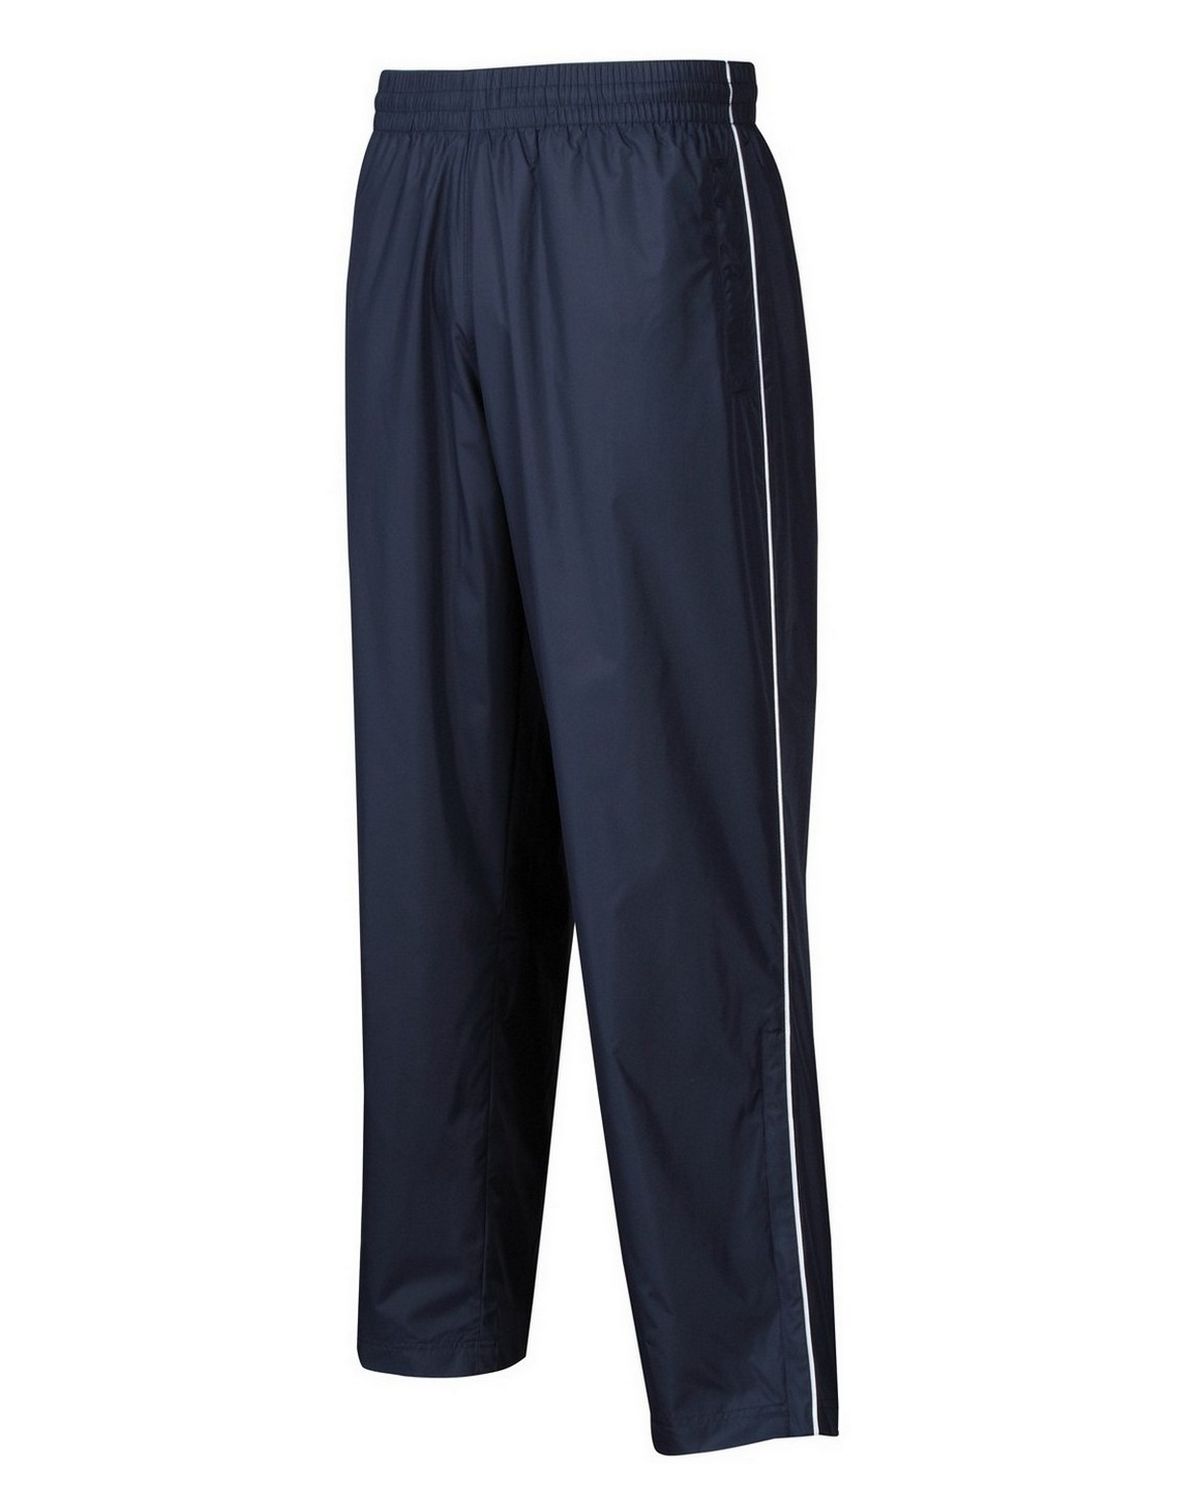 Buy Tri-Mountain 2347 Men's micro wind pants with mesh lining